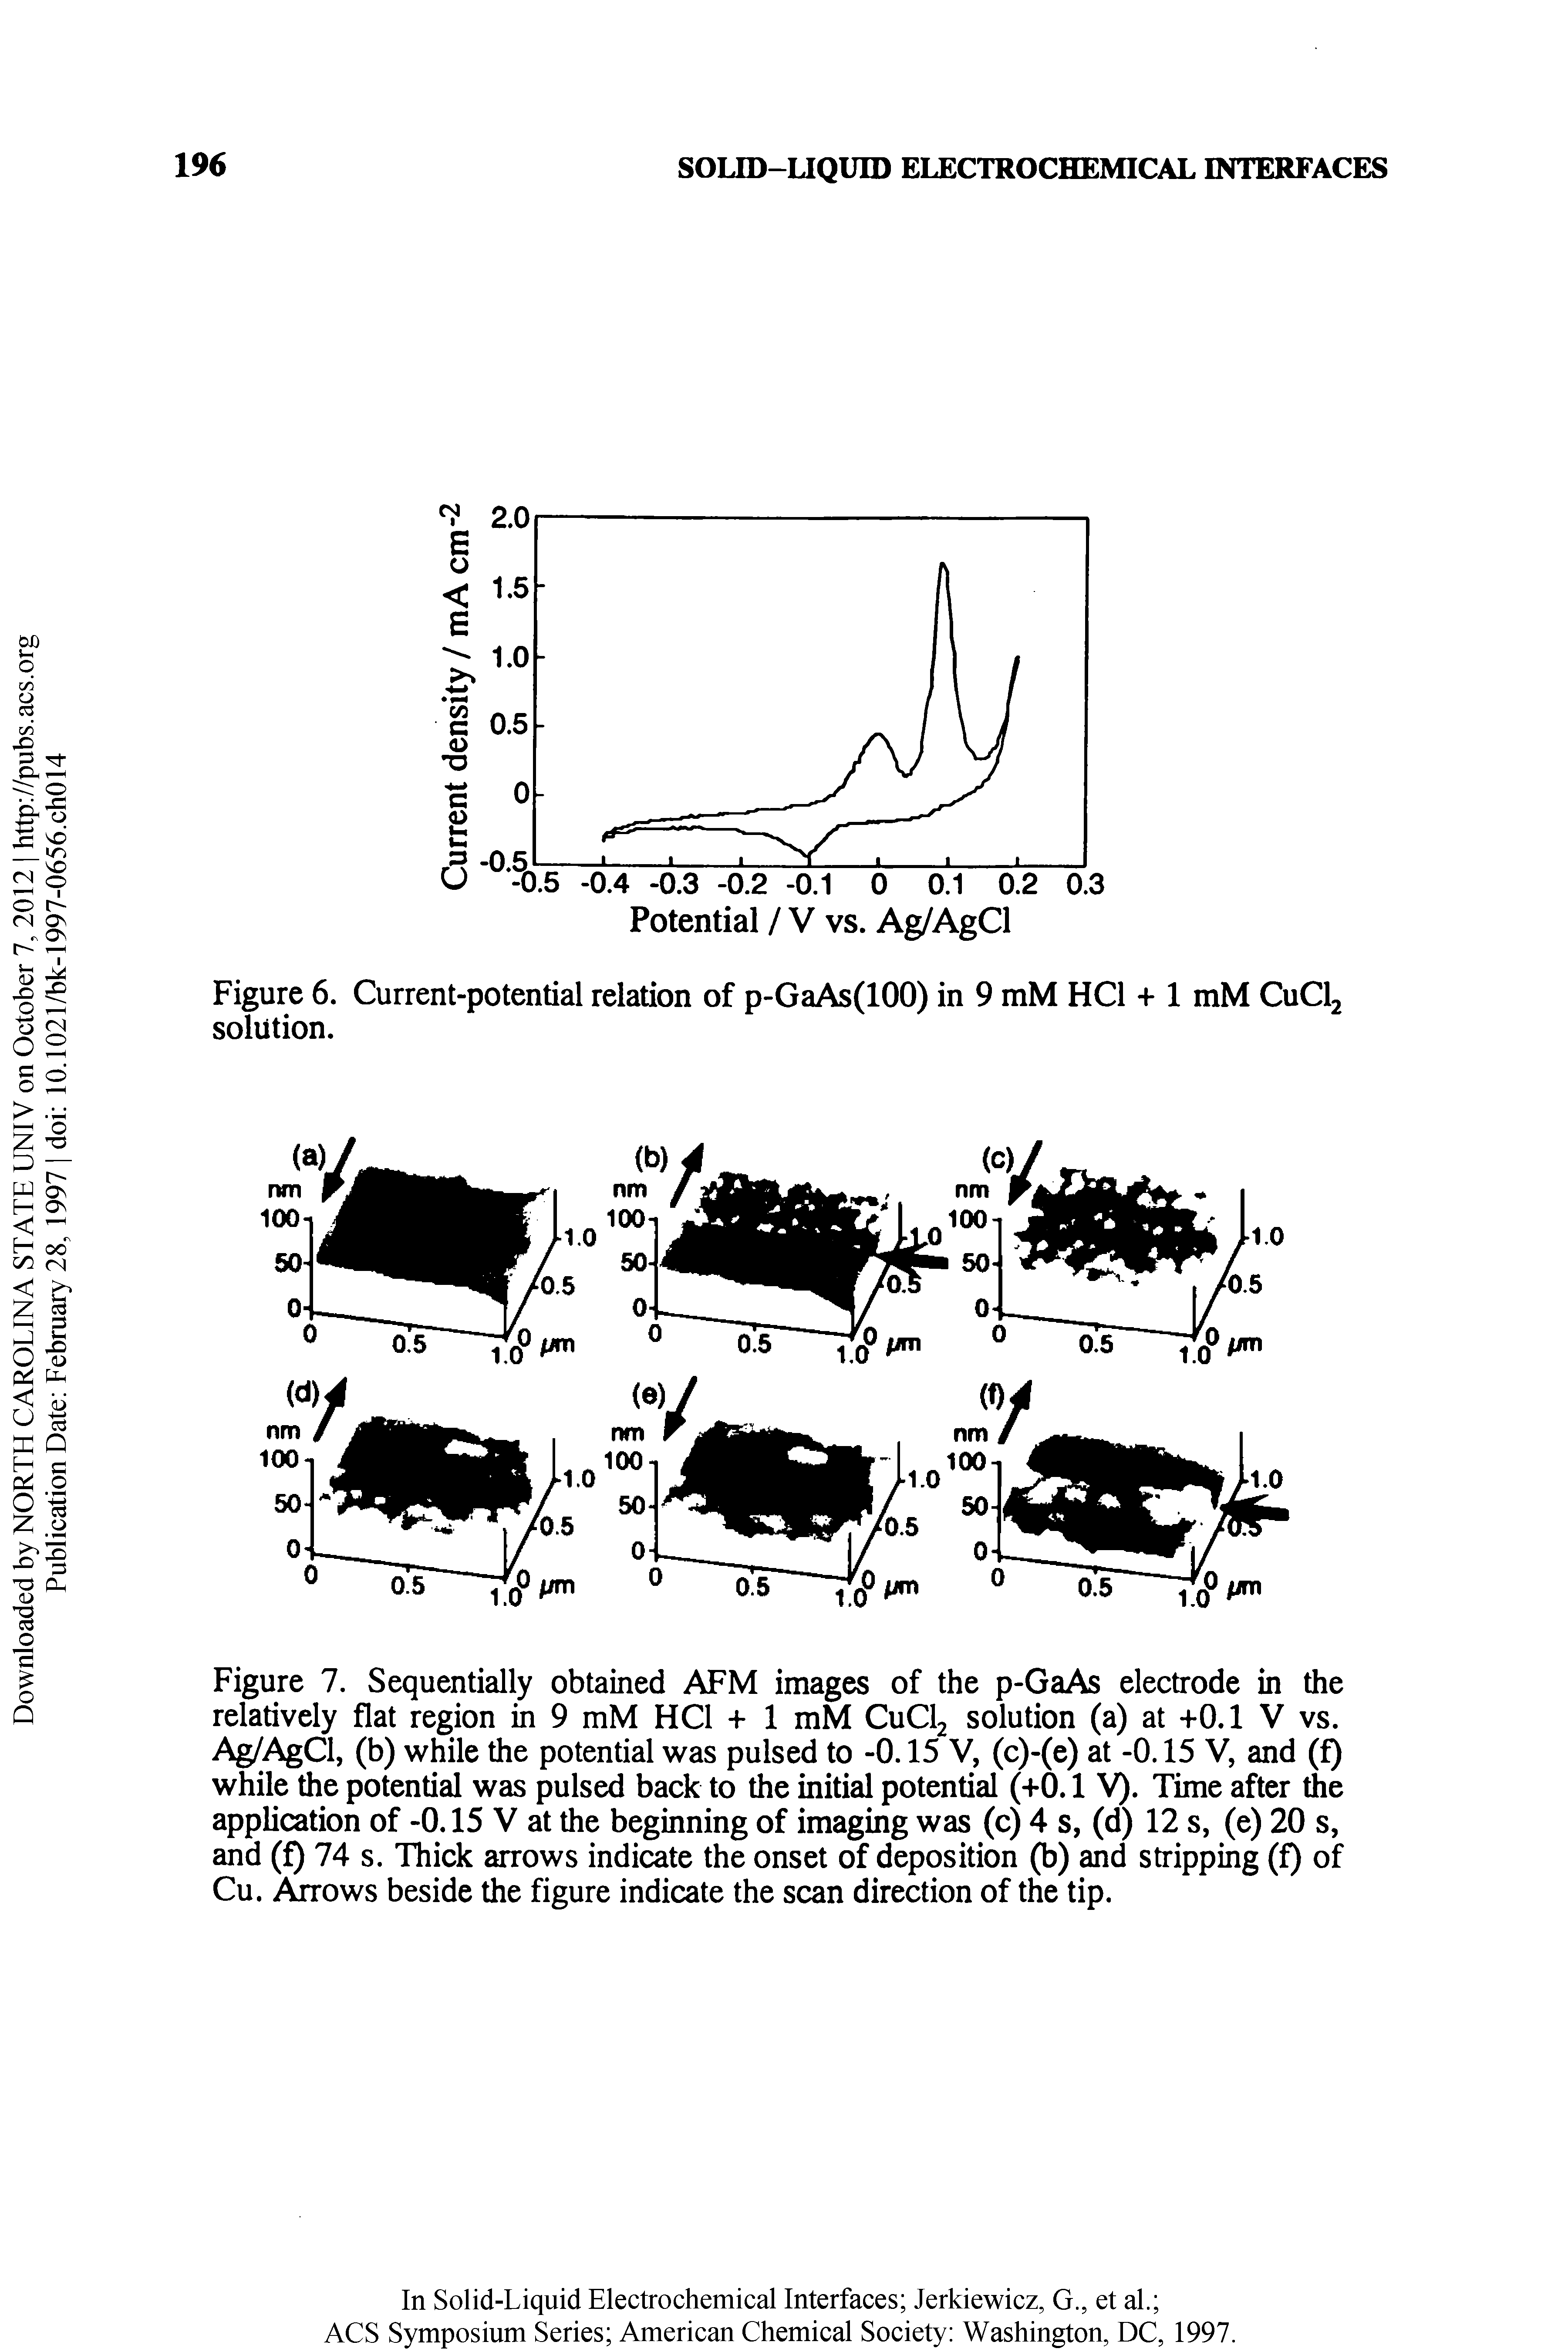 Figure 7. Sequentially obtained AFM images of the p-GaAs electrode in the relatively flat region in 9 mM HCl + 1 mM CUCI2 solution (a) at +0.1 V vs. Ag/AgCl, (b) while the potential was pulsed to -0.15 V, (c)-(e) at -0.15 V, and (f) while the potential was pulsed back to the initial potential (+0.1 V). Time after the application of -0.15 V at the beginning of imaging was (c) 4 s, (d) 12 s, (e) 20 s, and (f) 74 s. Thick arrows indicate the onset of deposition (b) and stripping (f) of Cu. A ows beside the figure indicate the scan direction of the tip.